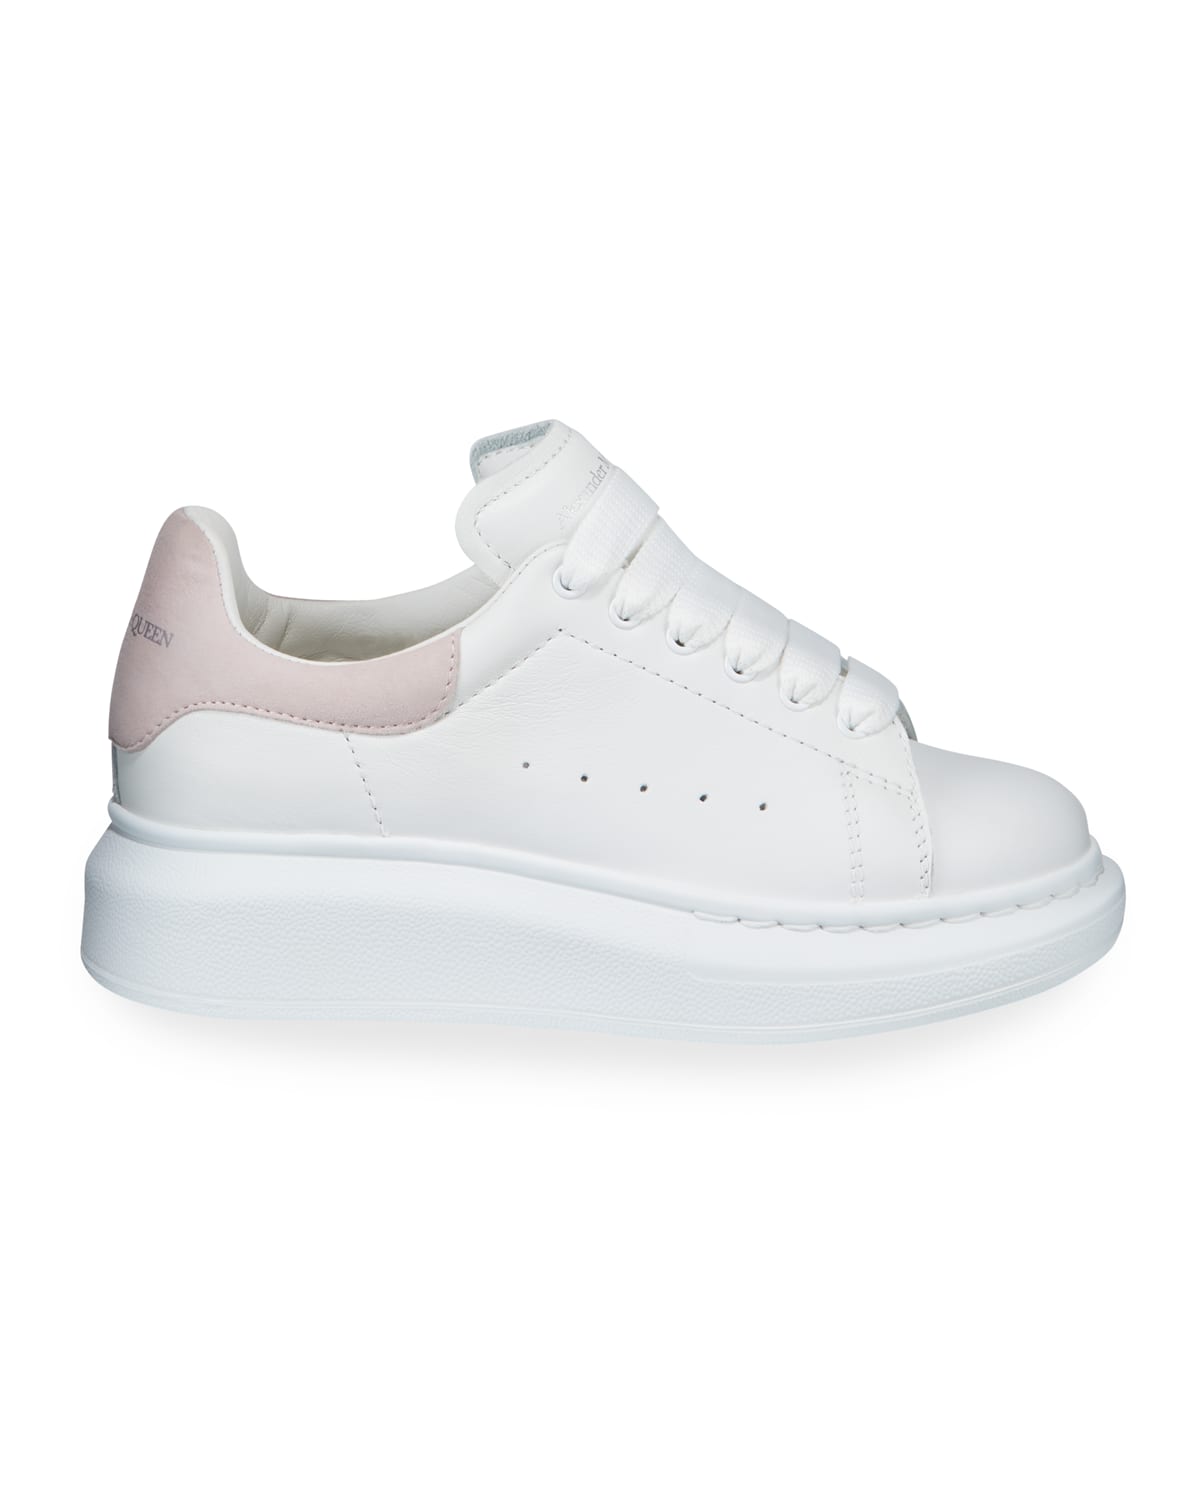 Oversized Leather Sneakers, Toddler/Kids